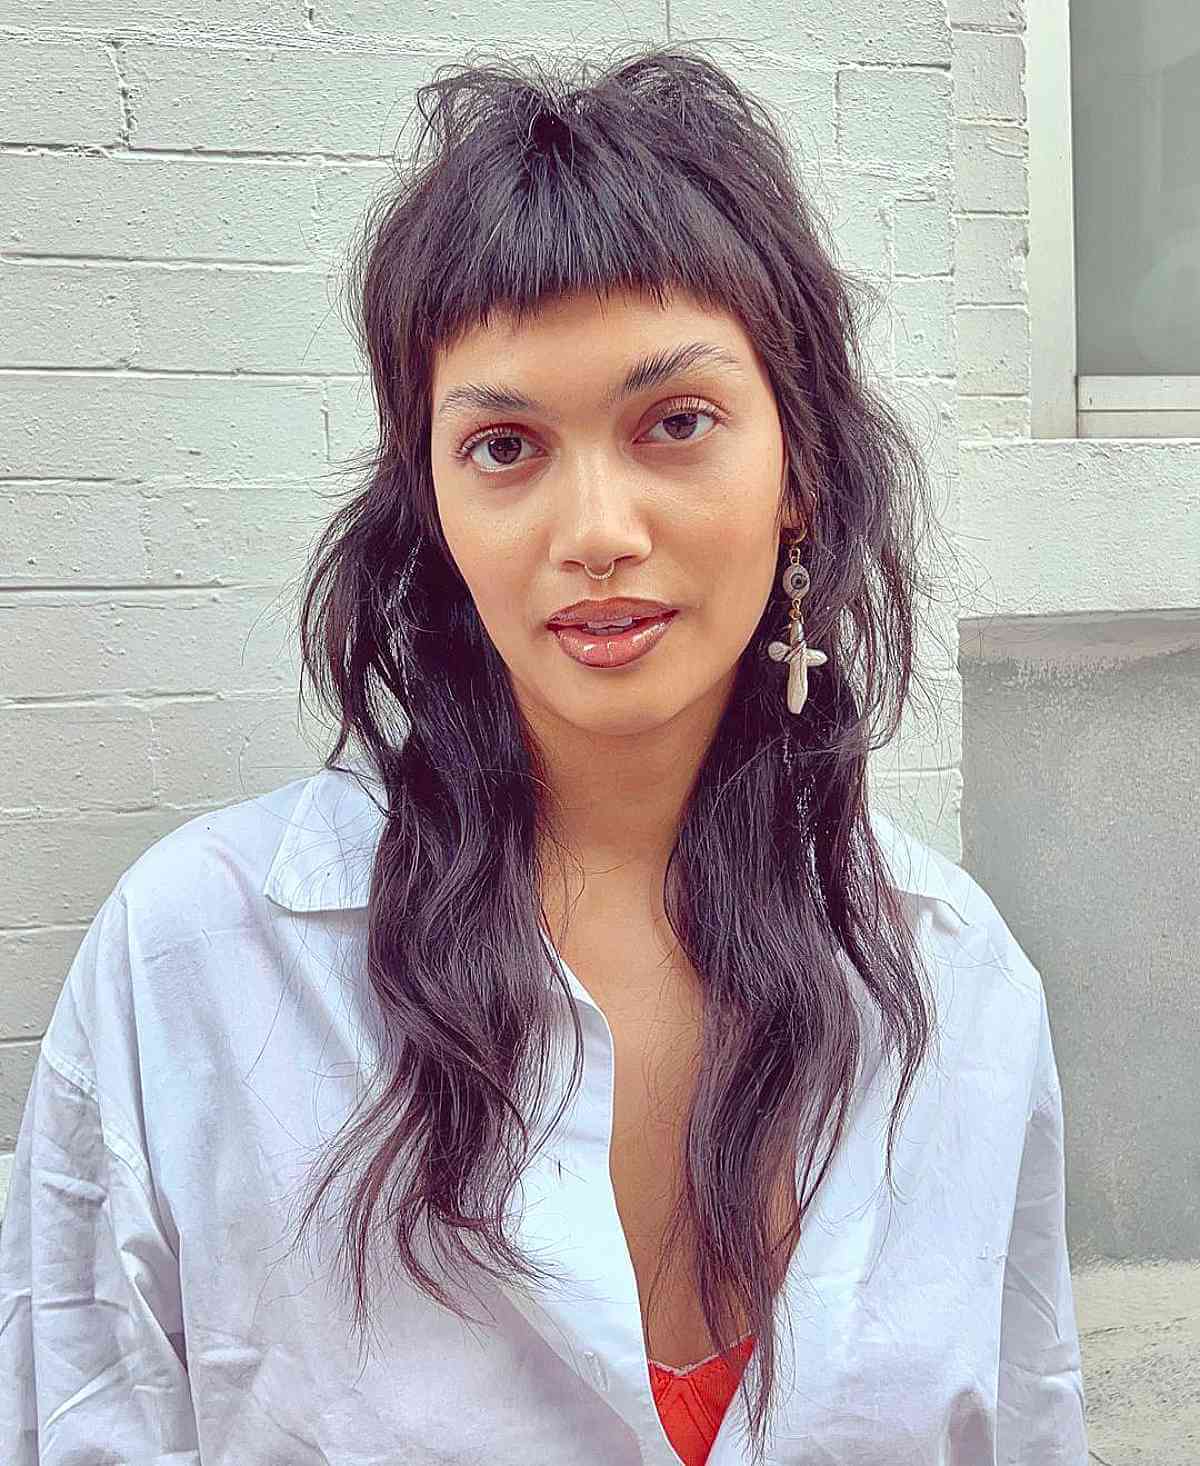 15 Best Hairstyles With Bangs - Ideas for Haircuts With Bangs | Allure